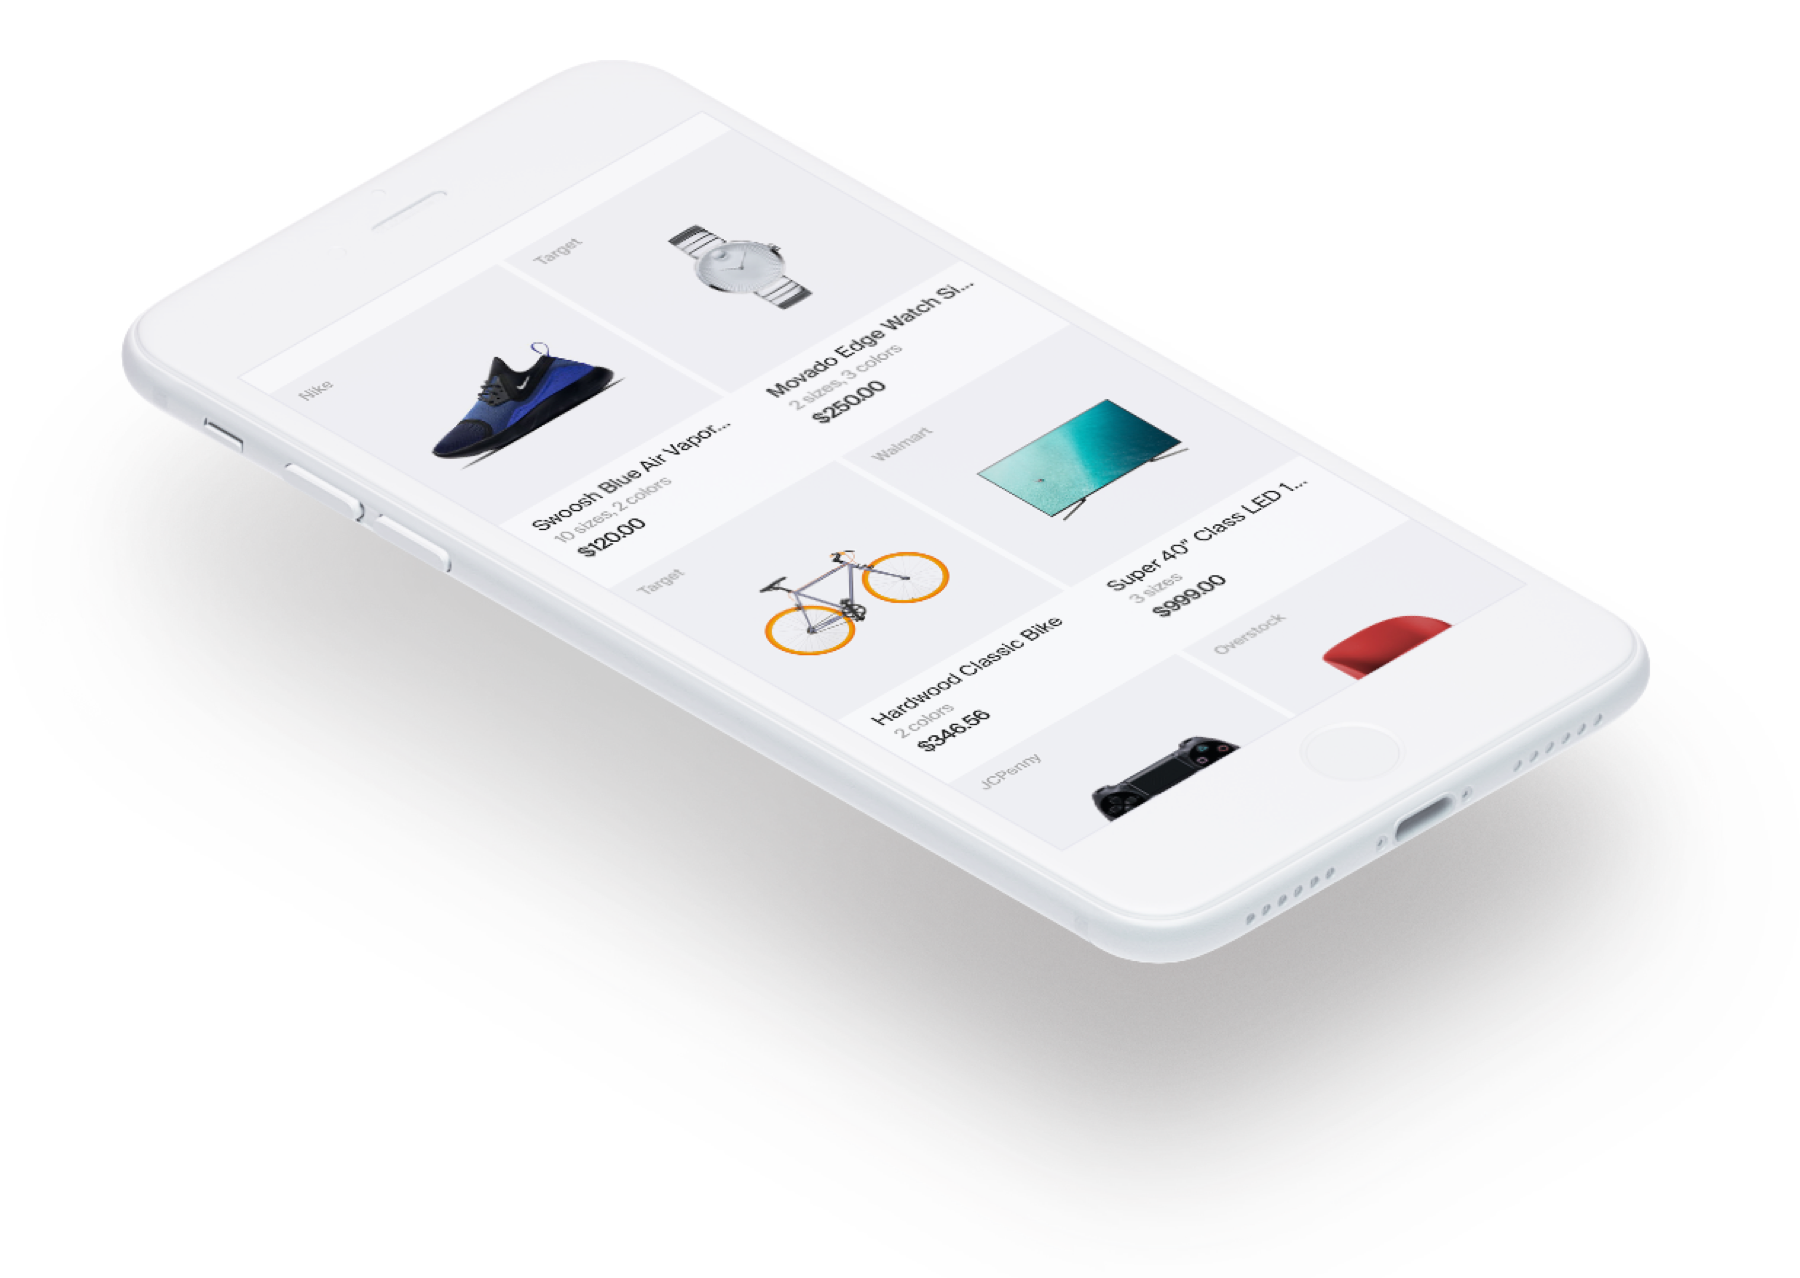 honey smart shopping assistant android